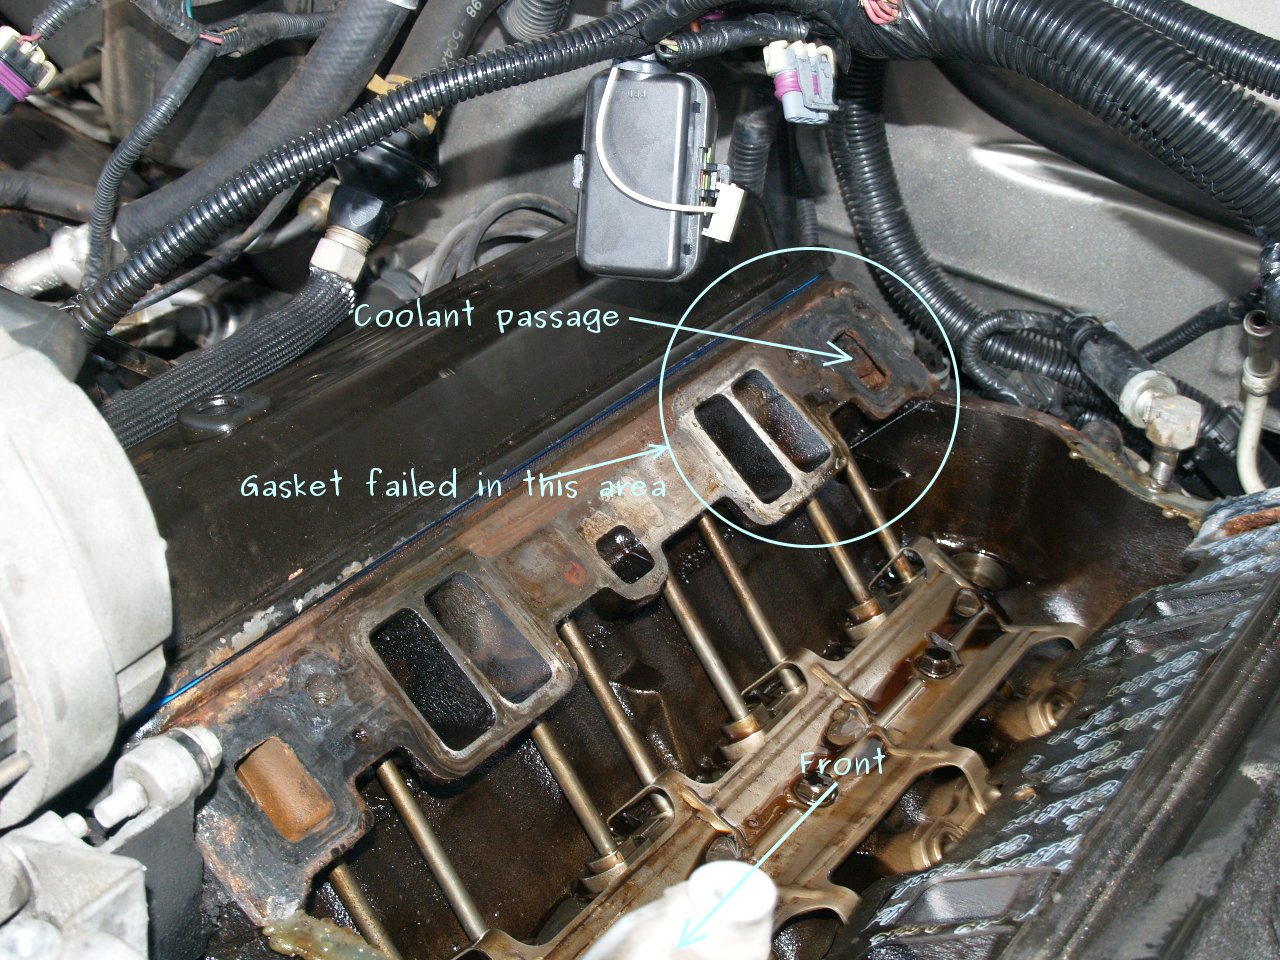 See P0867 in engine